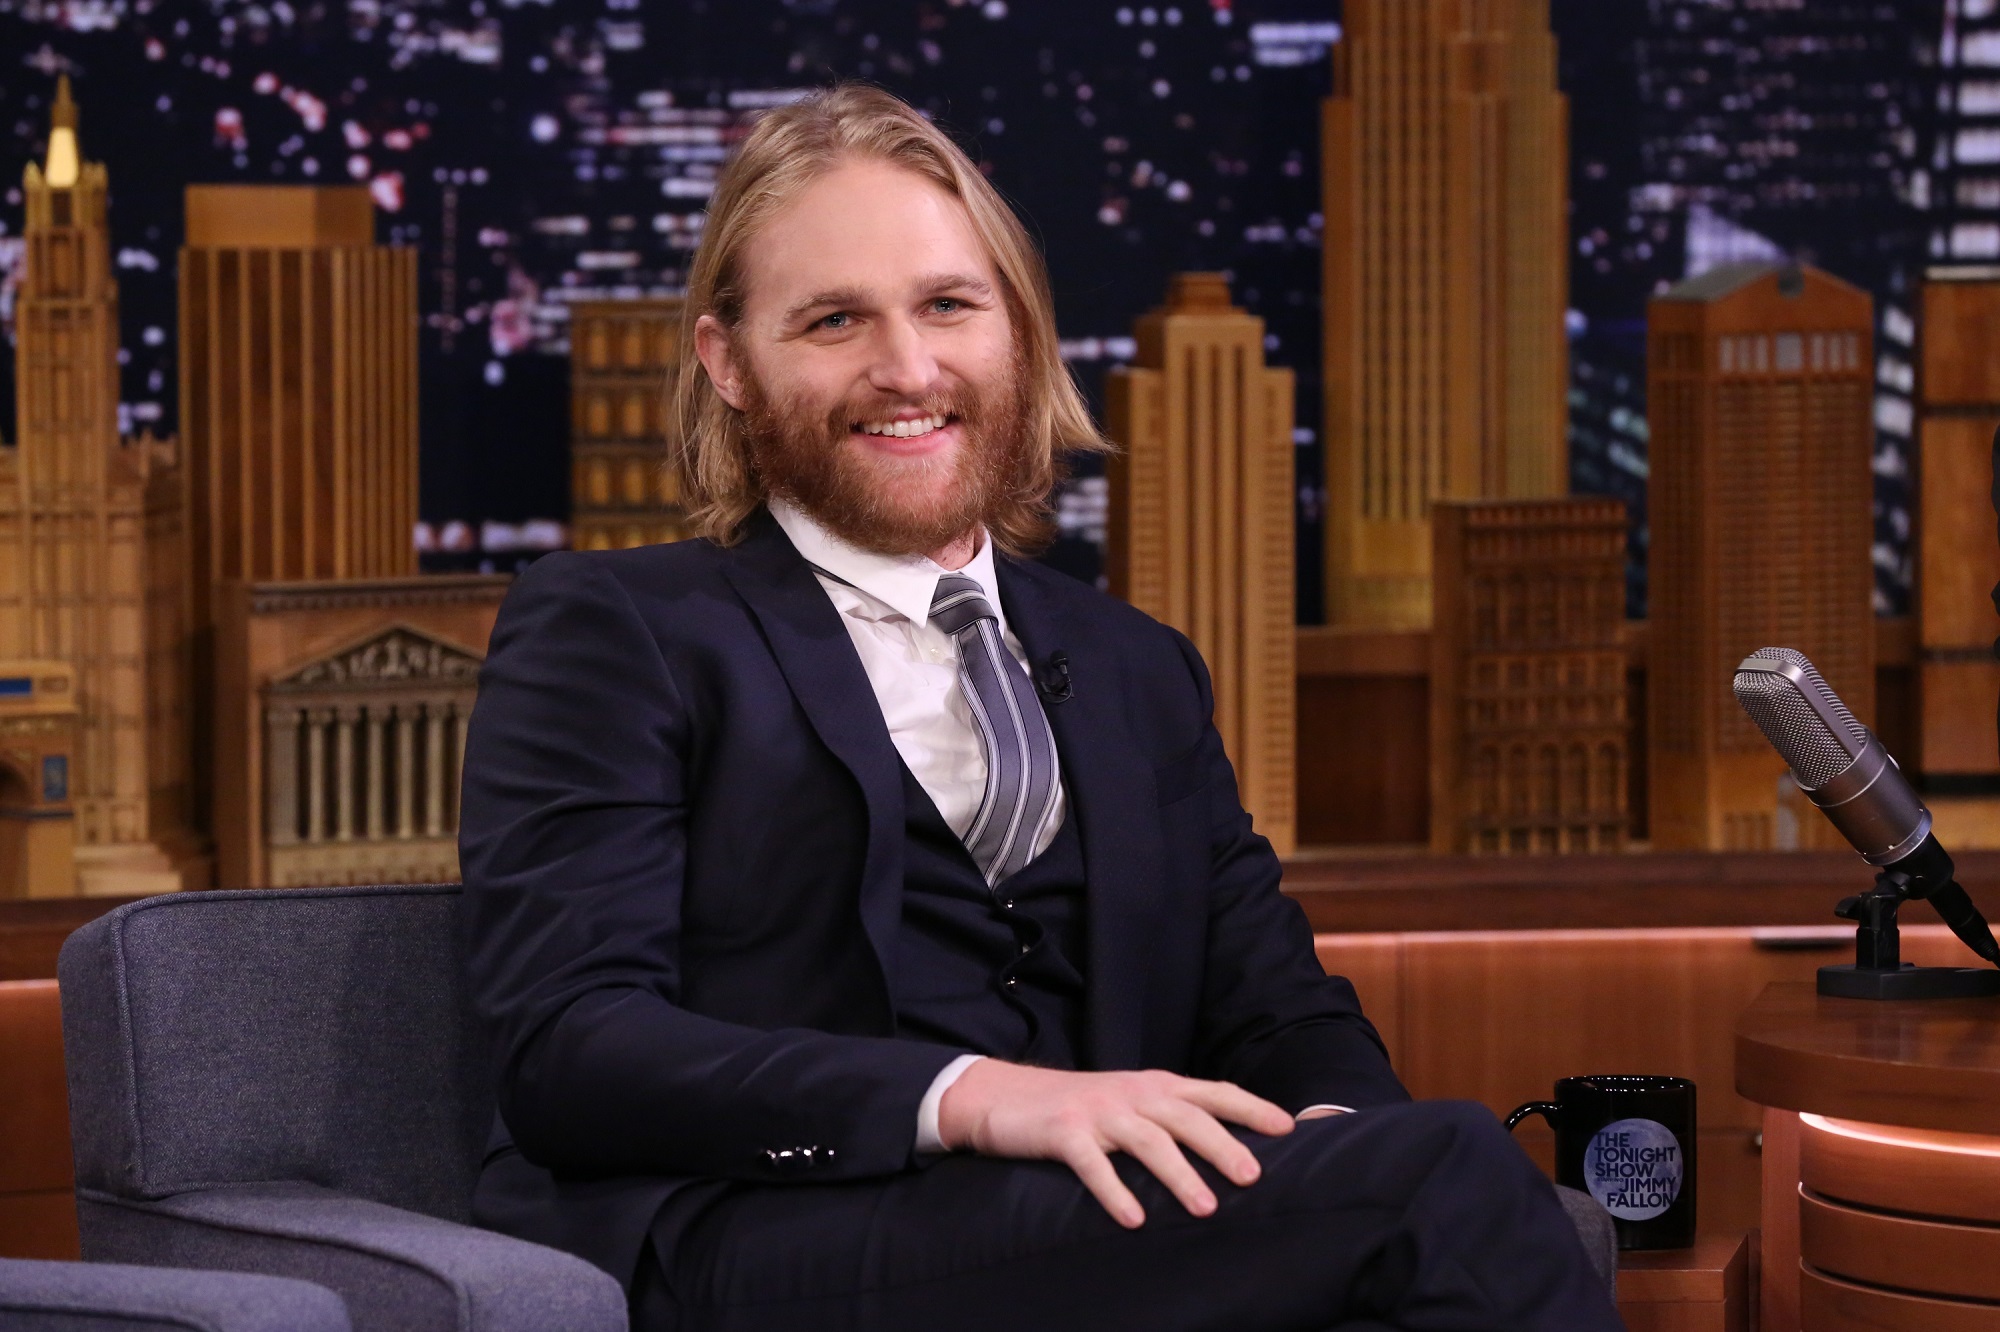 Actor Wyatt Russell appears on 'The Tonight Show starring Jimmy Fallon' in 2018